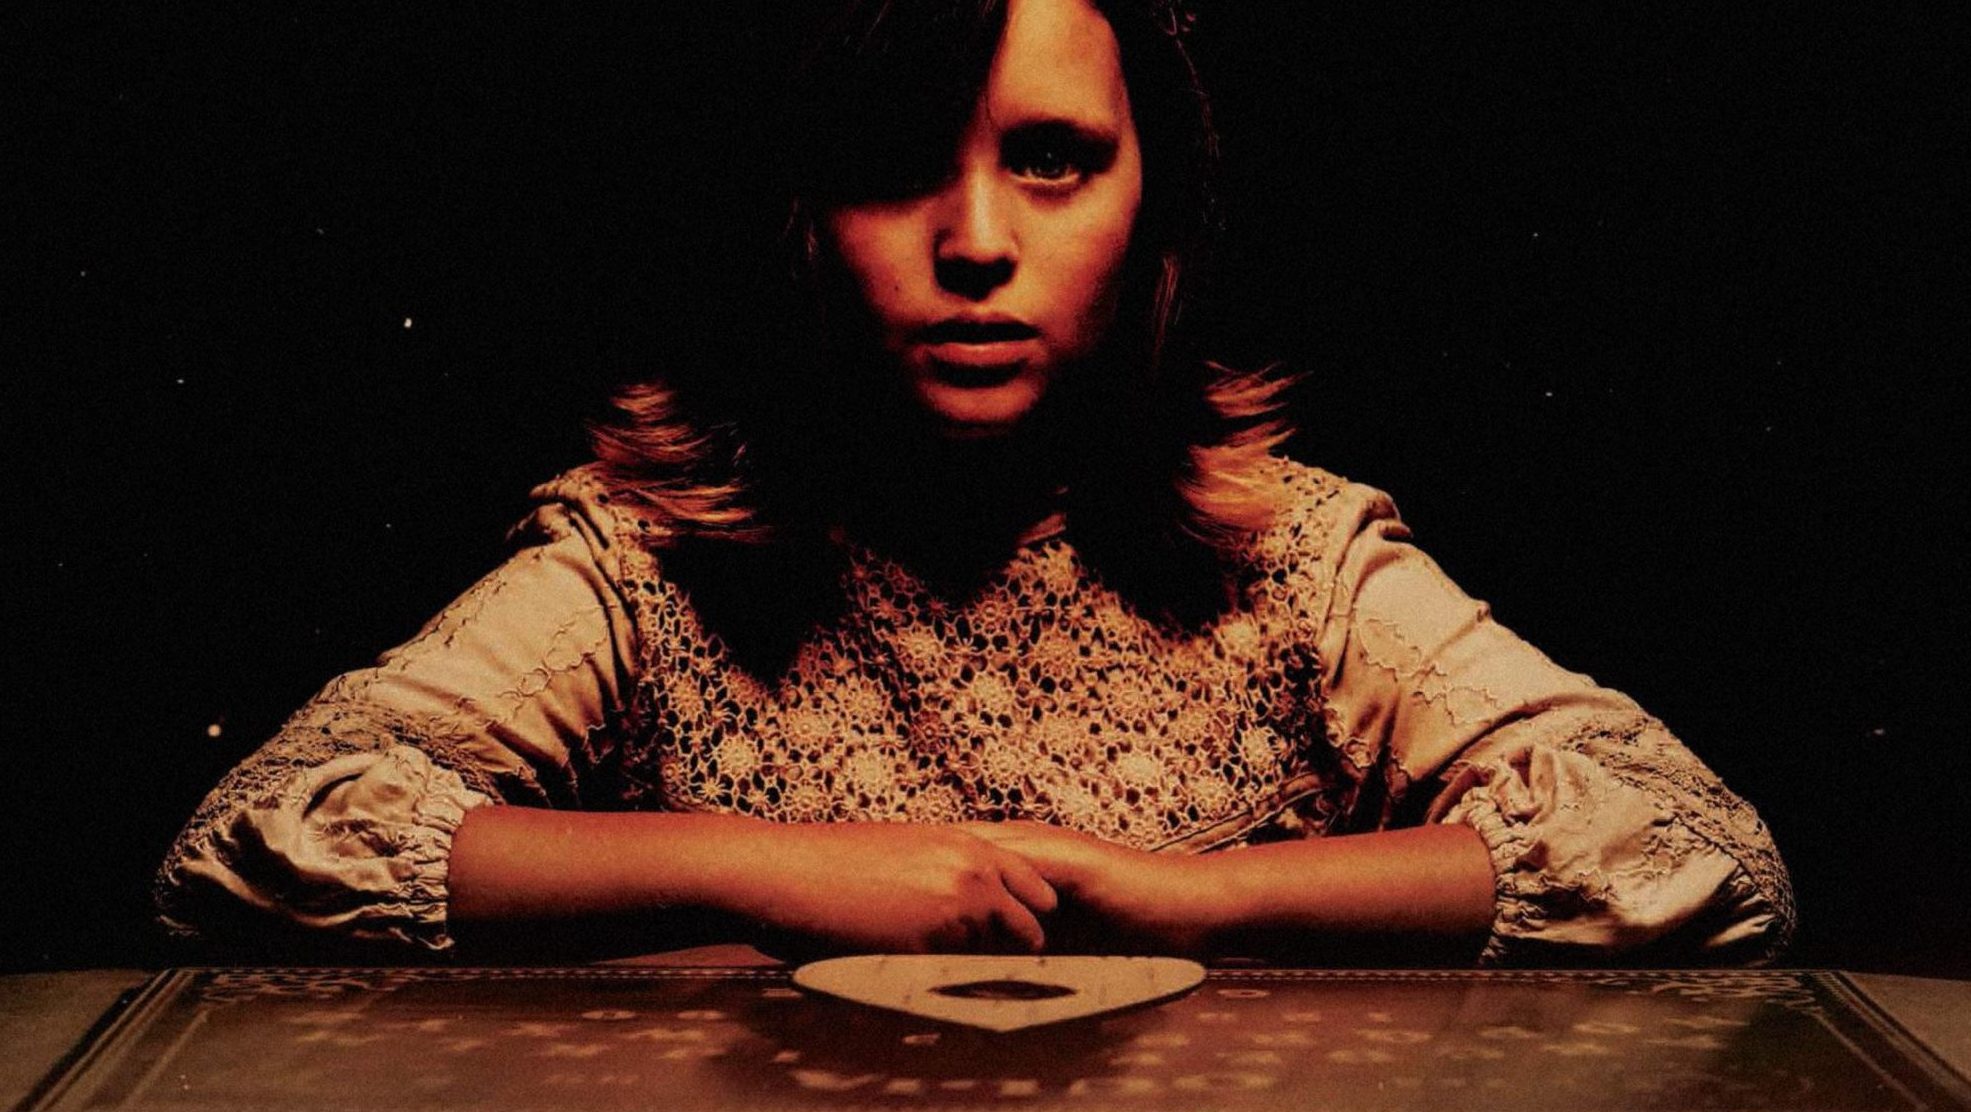 ‘Ouija: Origin of Evil’ Review: Missed opportunity to thoroughly scare viewers